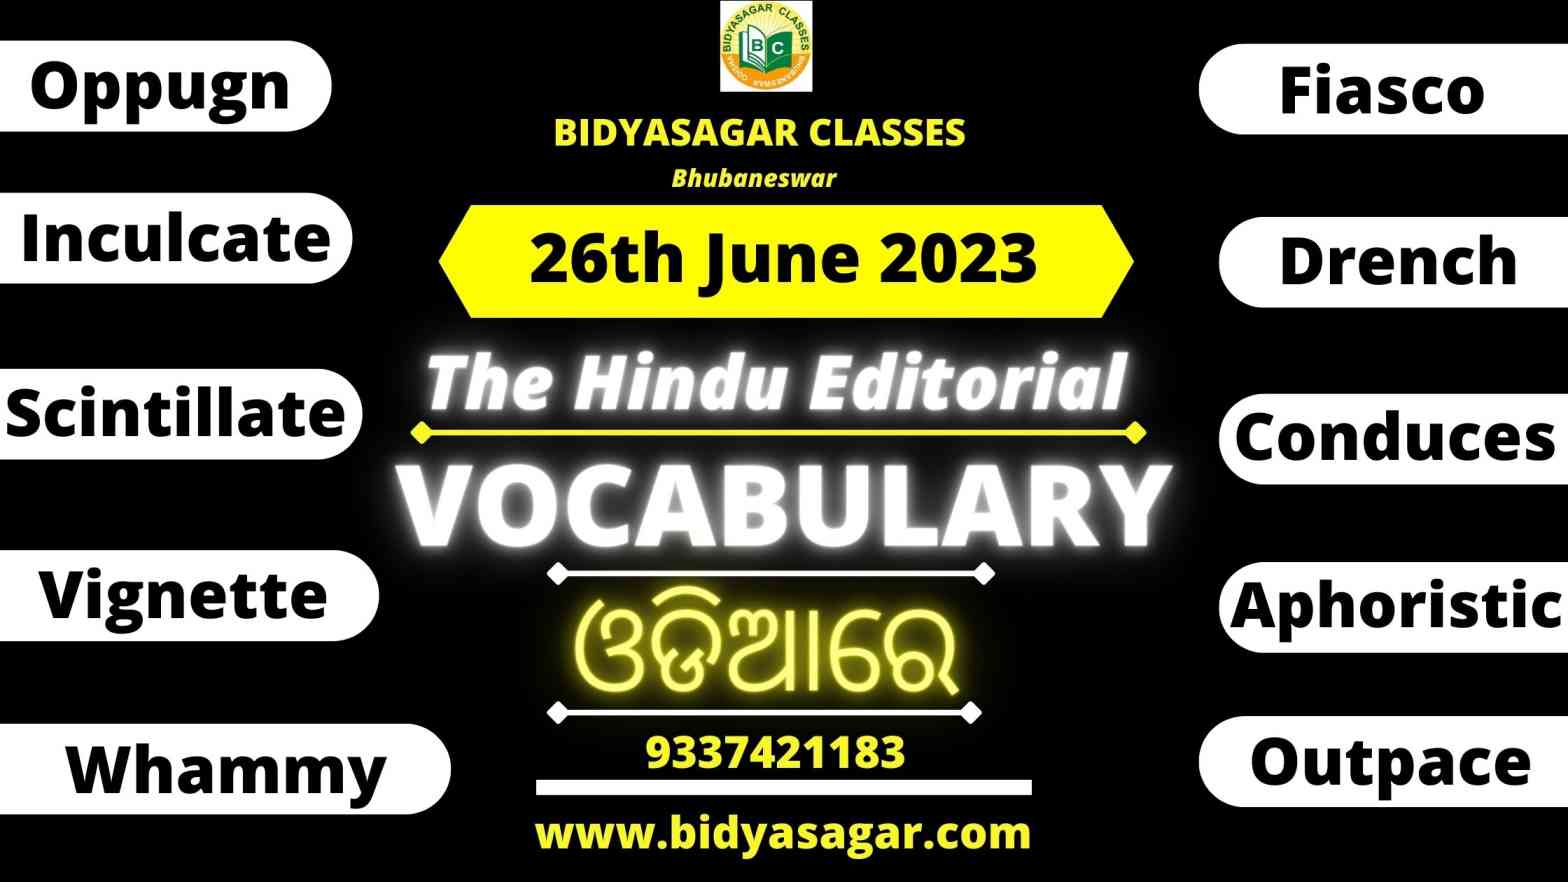 The Hindu Editorial Vocabulary of 26th June 2023